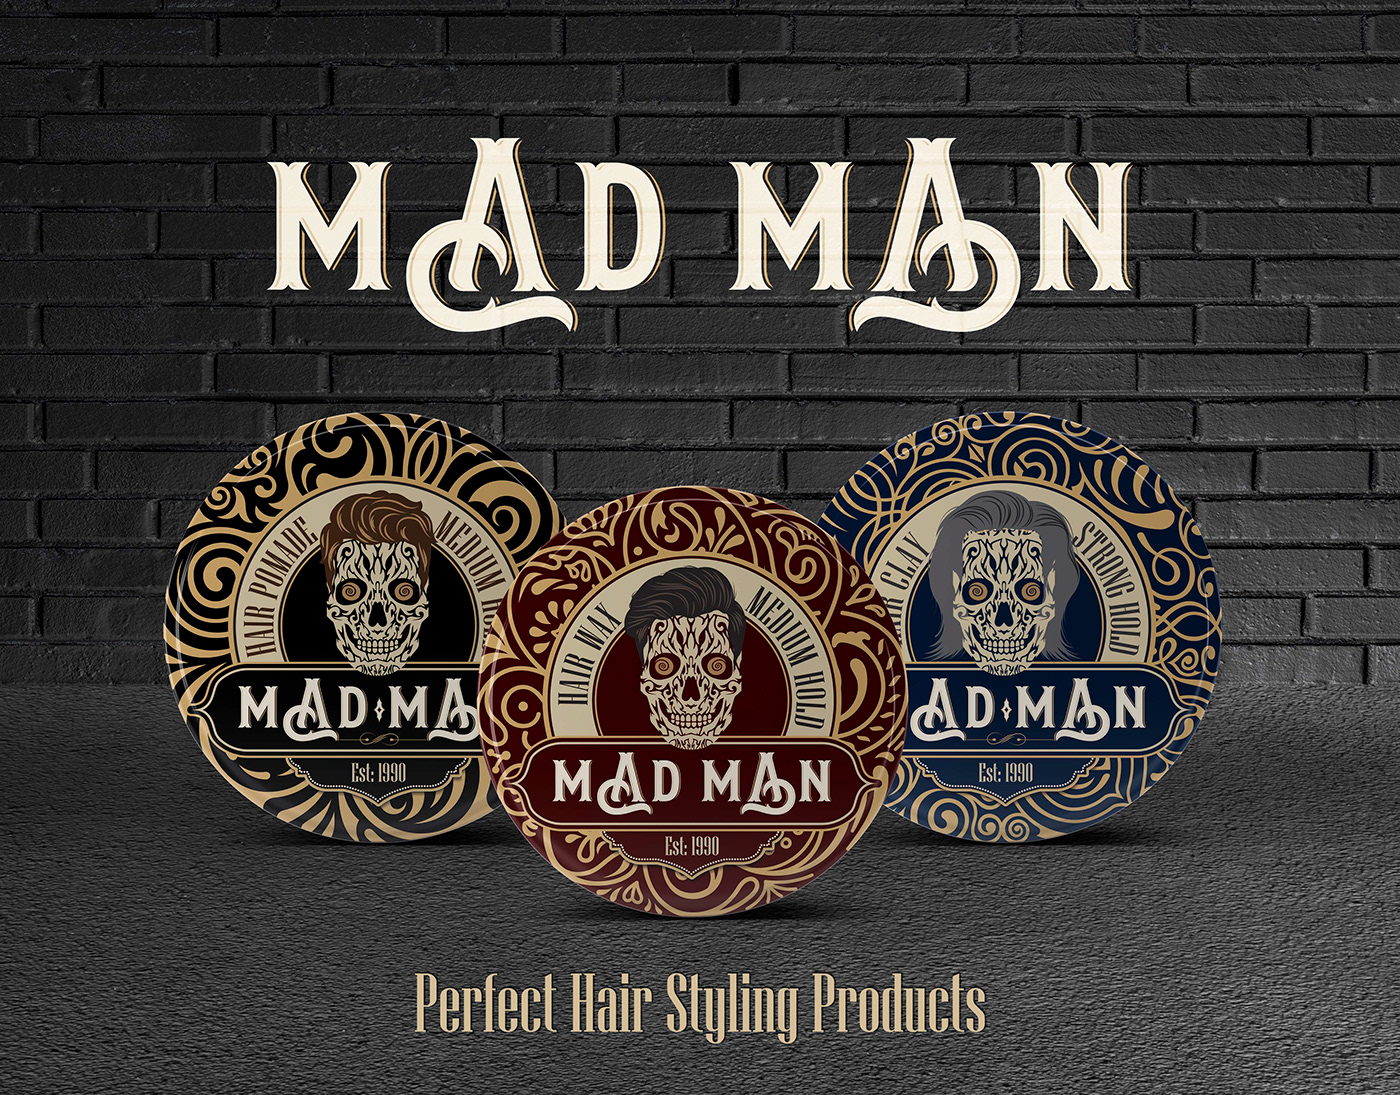 Packaging graphic design  wax man hairstyle package product product design  Mad pomade